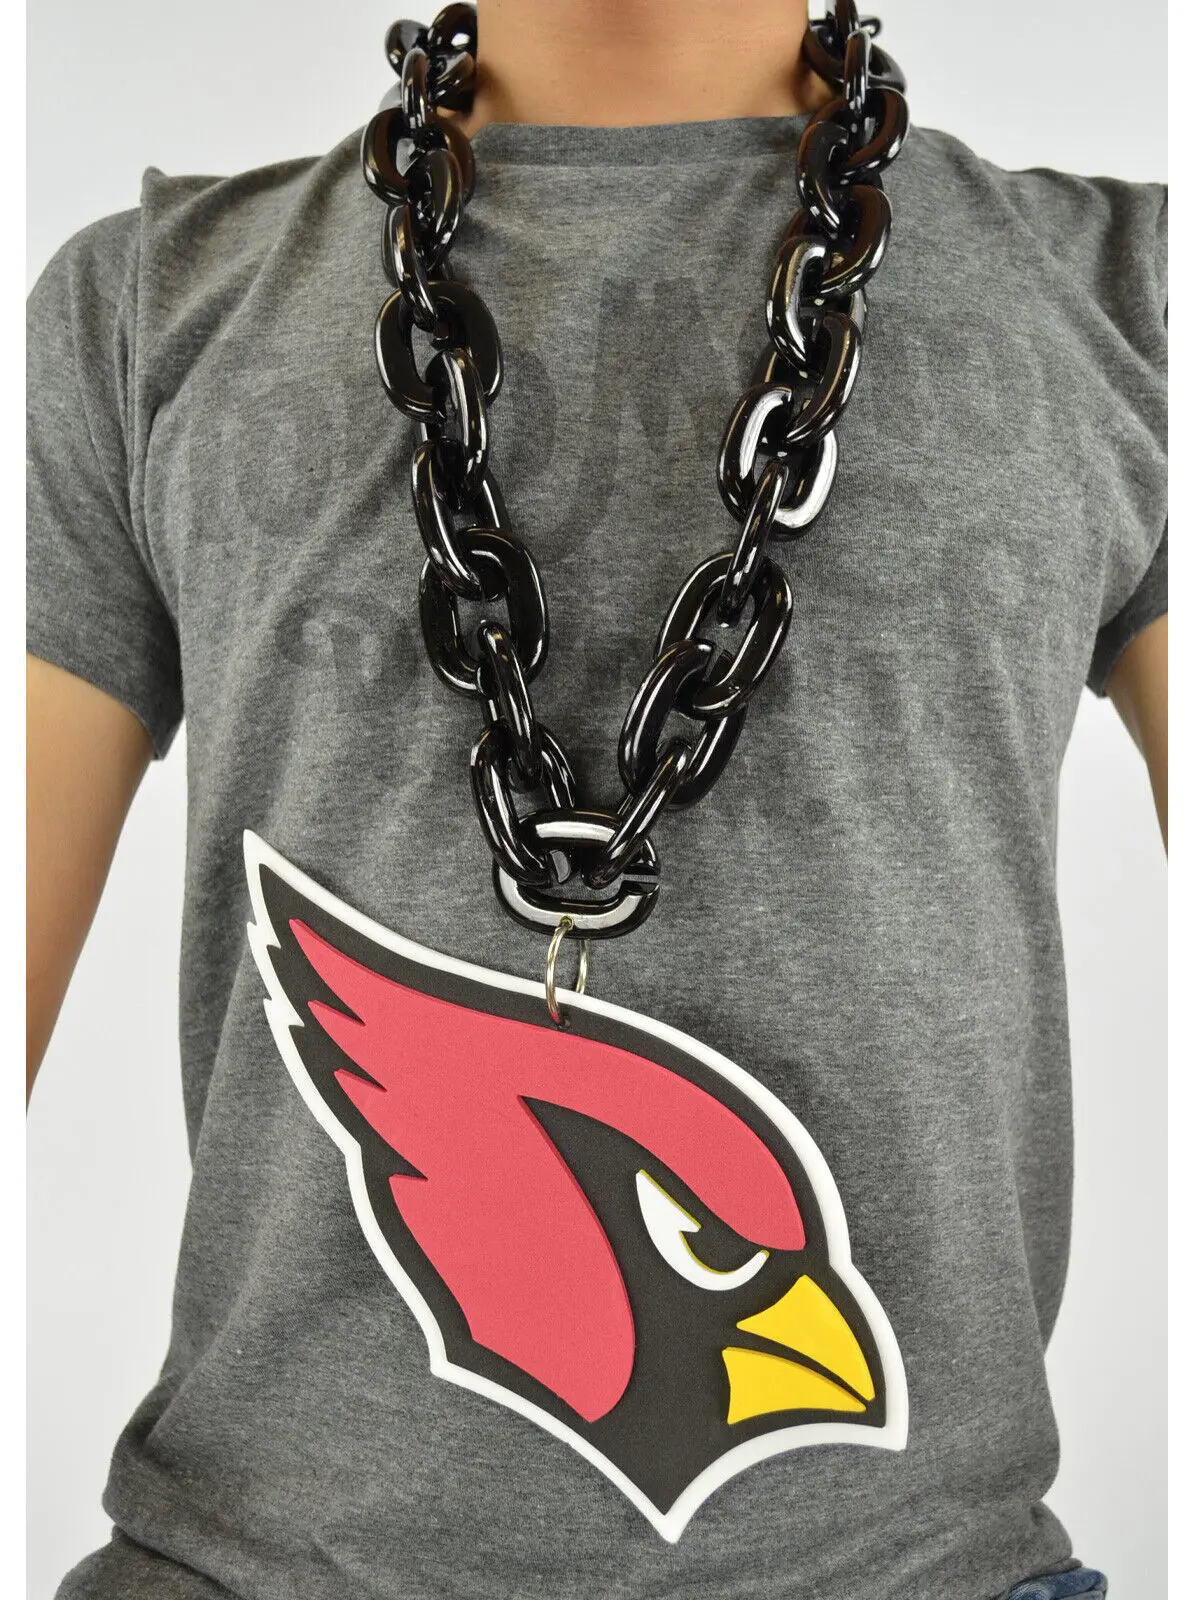 New MLB St. Louis Cardinals RED Fan Chain Necklace Foam